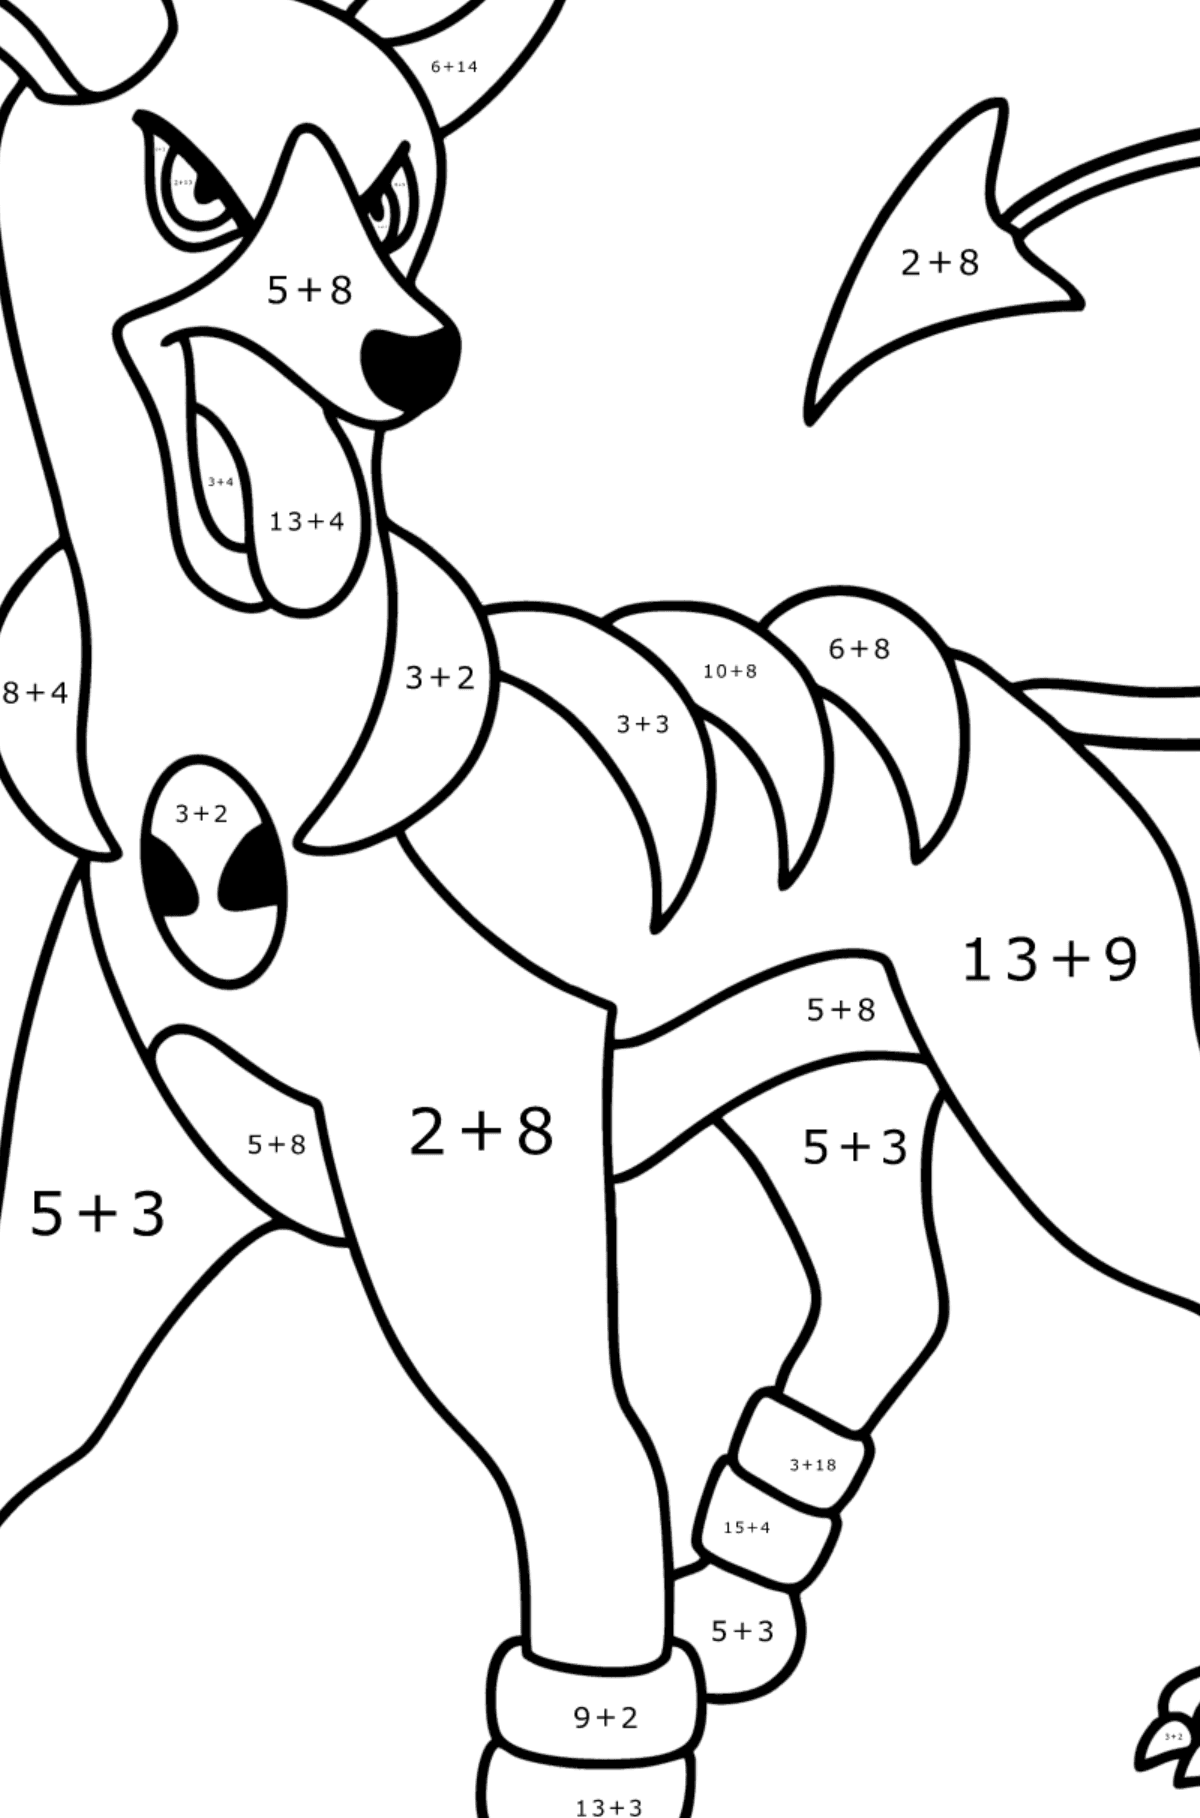 Colouring page pokãmon x and y houndoom â online and print for free